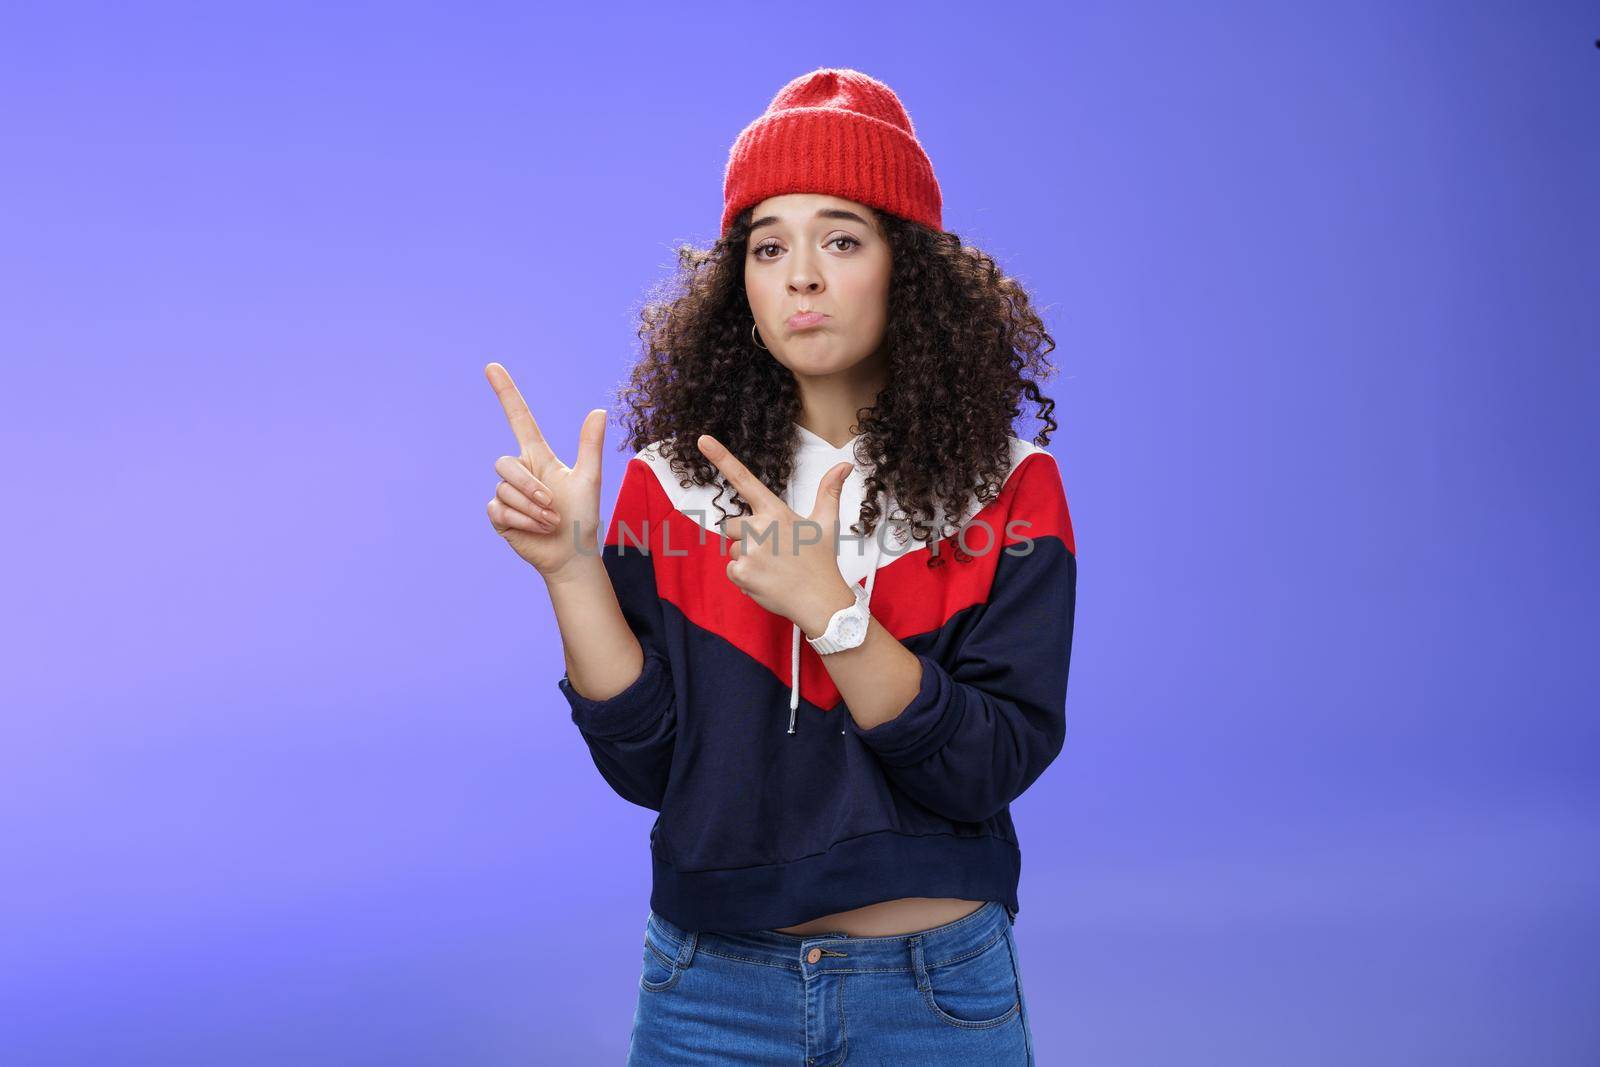 Portrait of silly upset cute curly-haired woman in trendy beanie pursing lips in sadness and frowning making disappointed, regret face pointing at upper left corner unhappy and sad over blue wall.